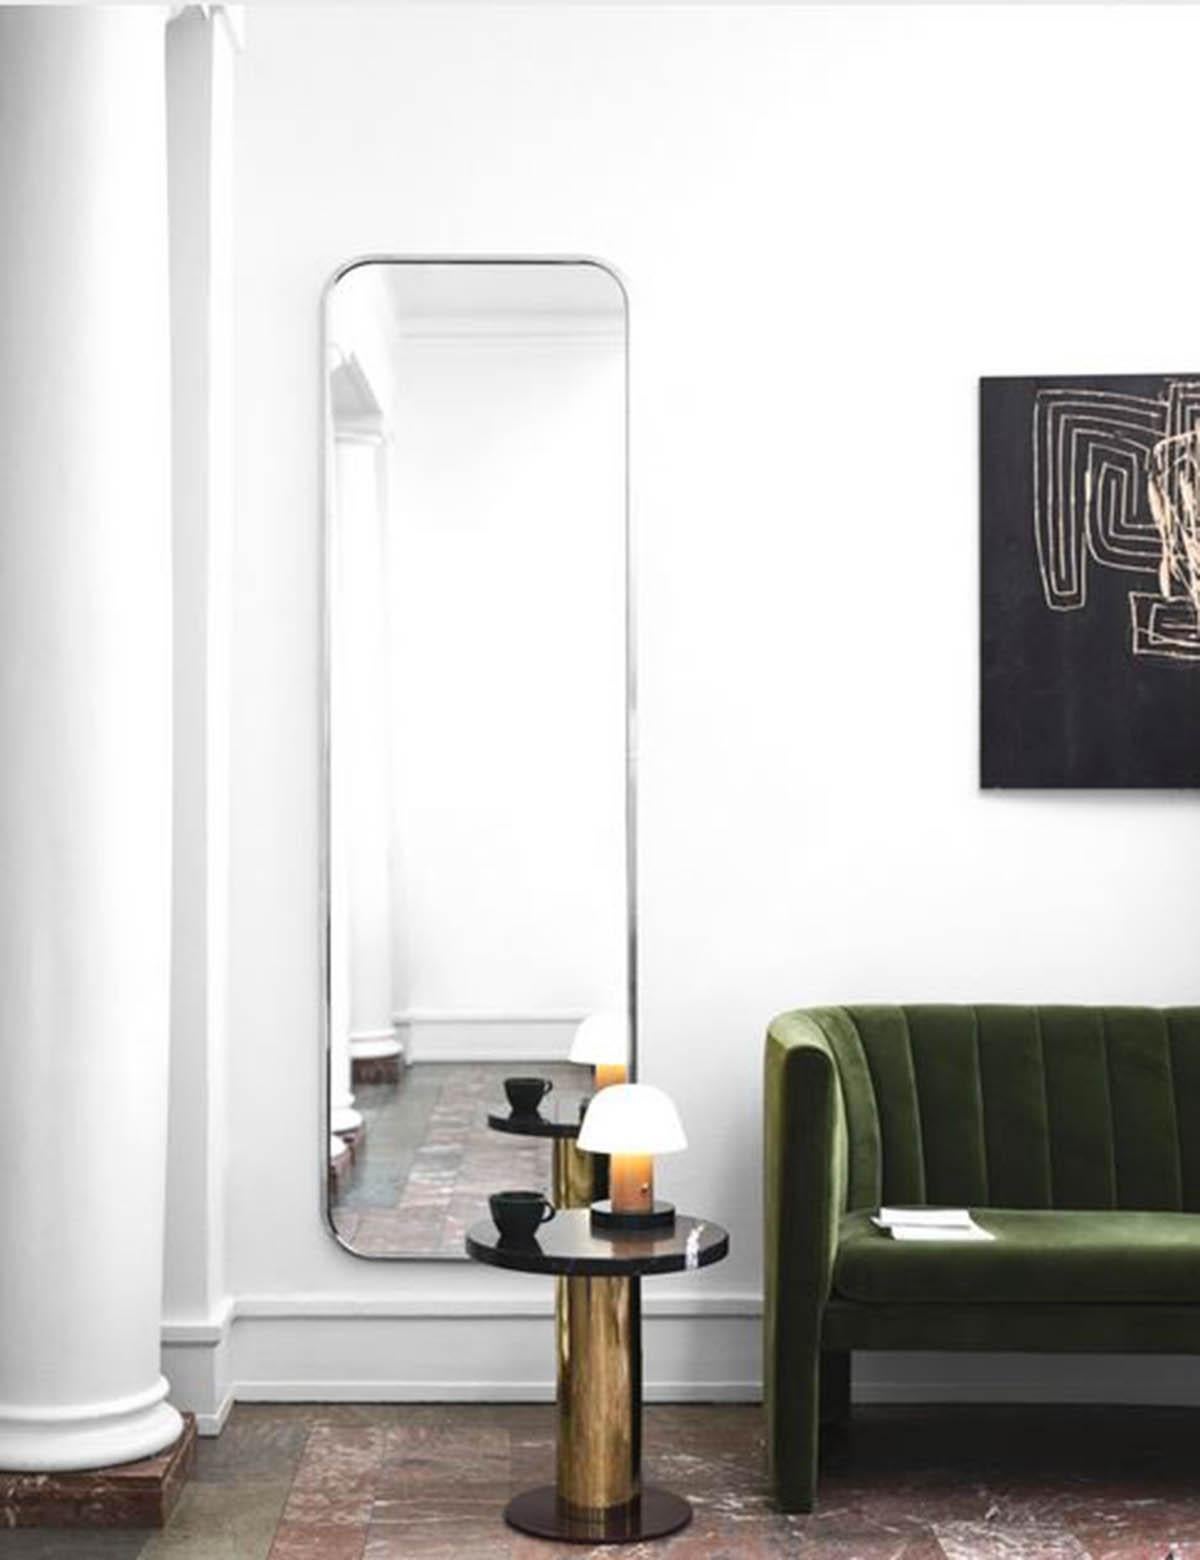 The Sillon series, designed by Sebastian Herkner for &Tradition, takes its cue from the French Art Deco movement. 
Named after the French word for ‘groove,’ the Sillon series of mirrors is punctuated with a corrugated frame that contrasts